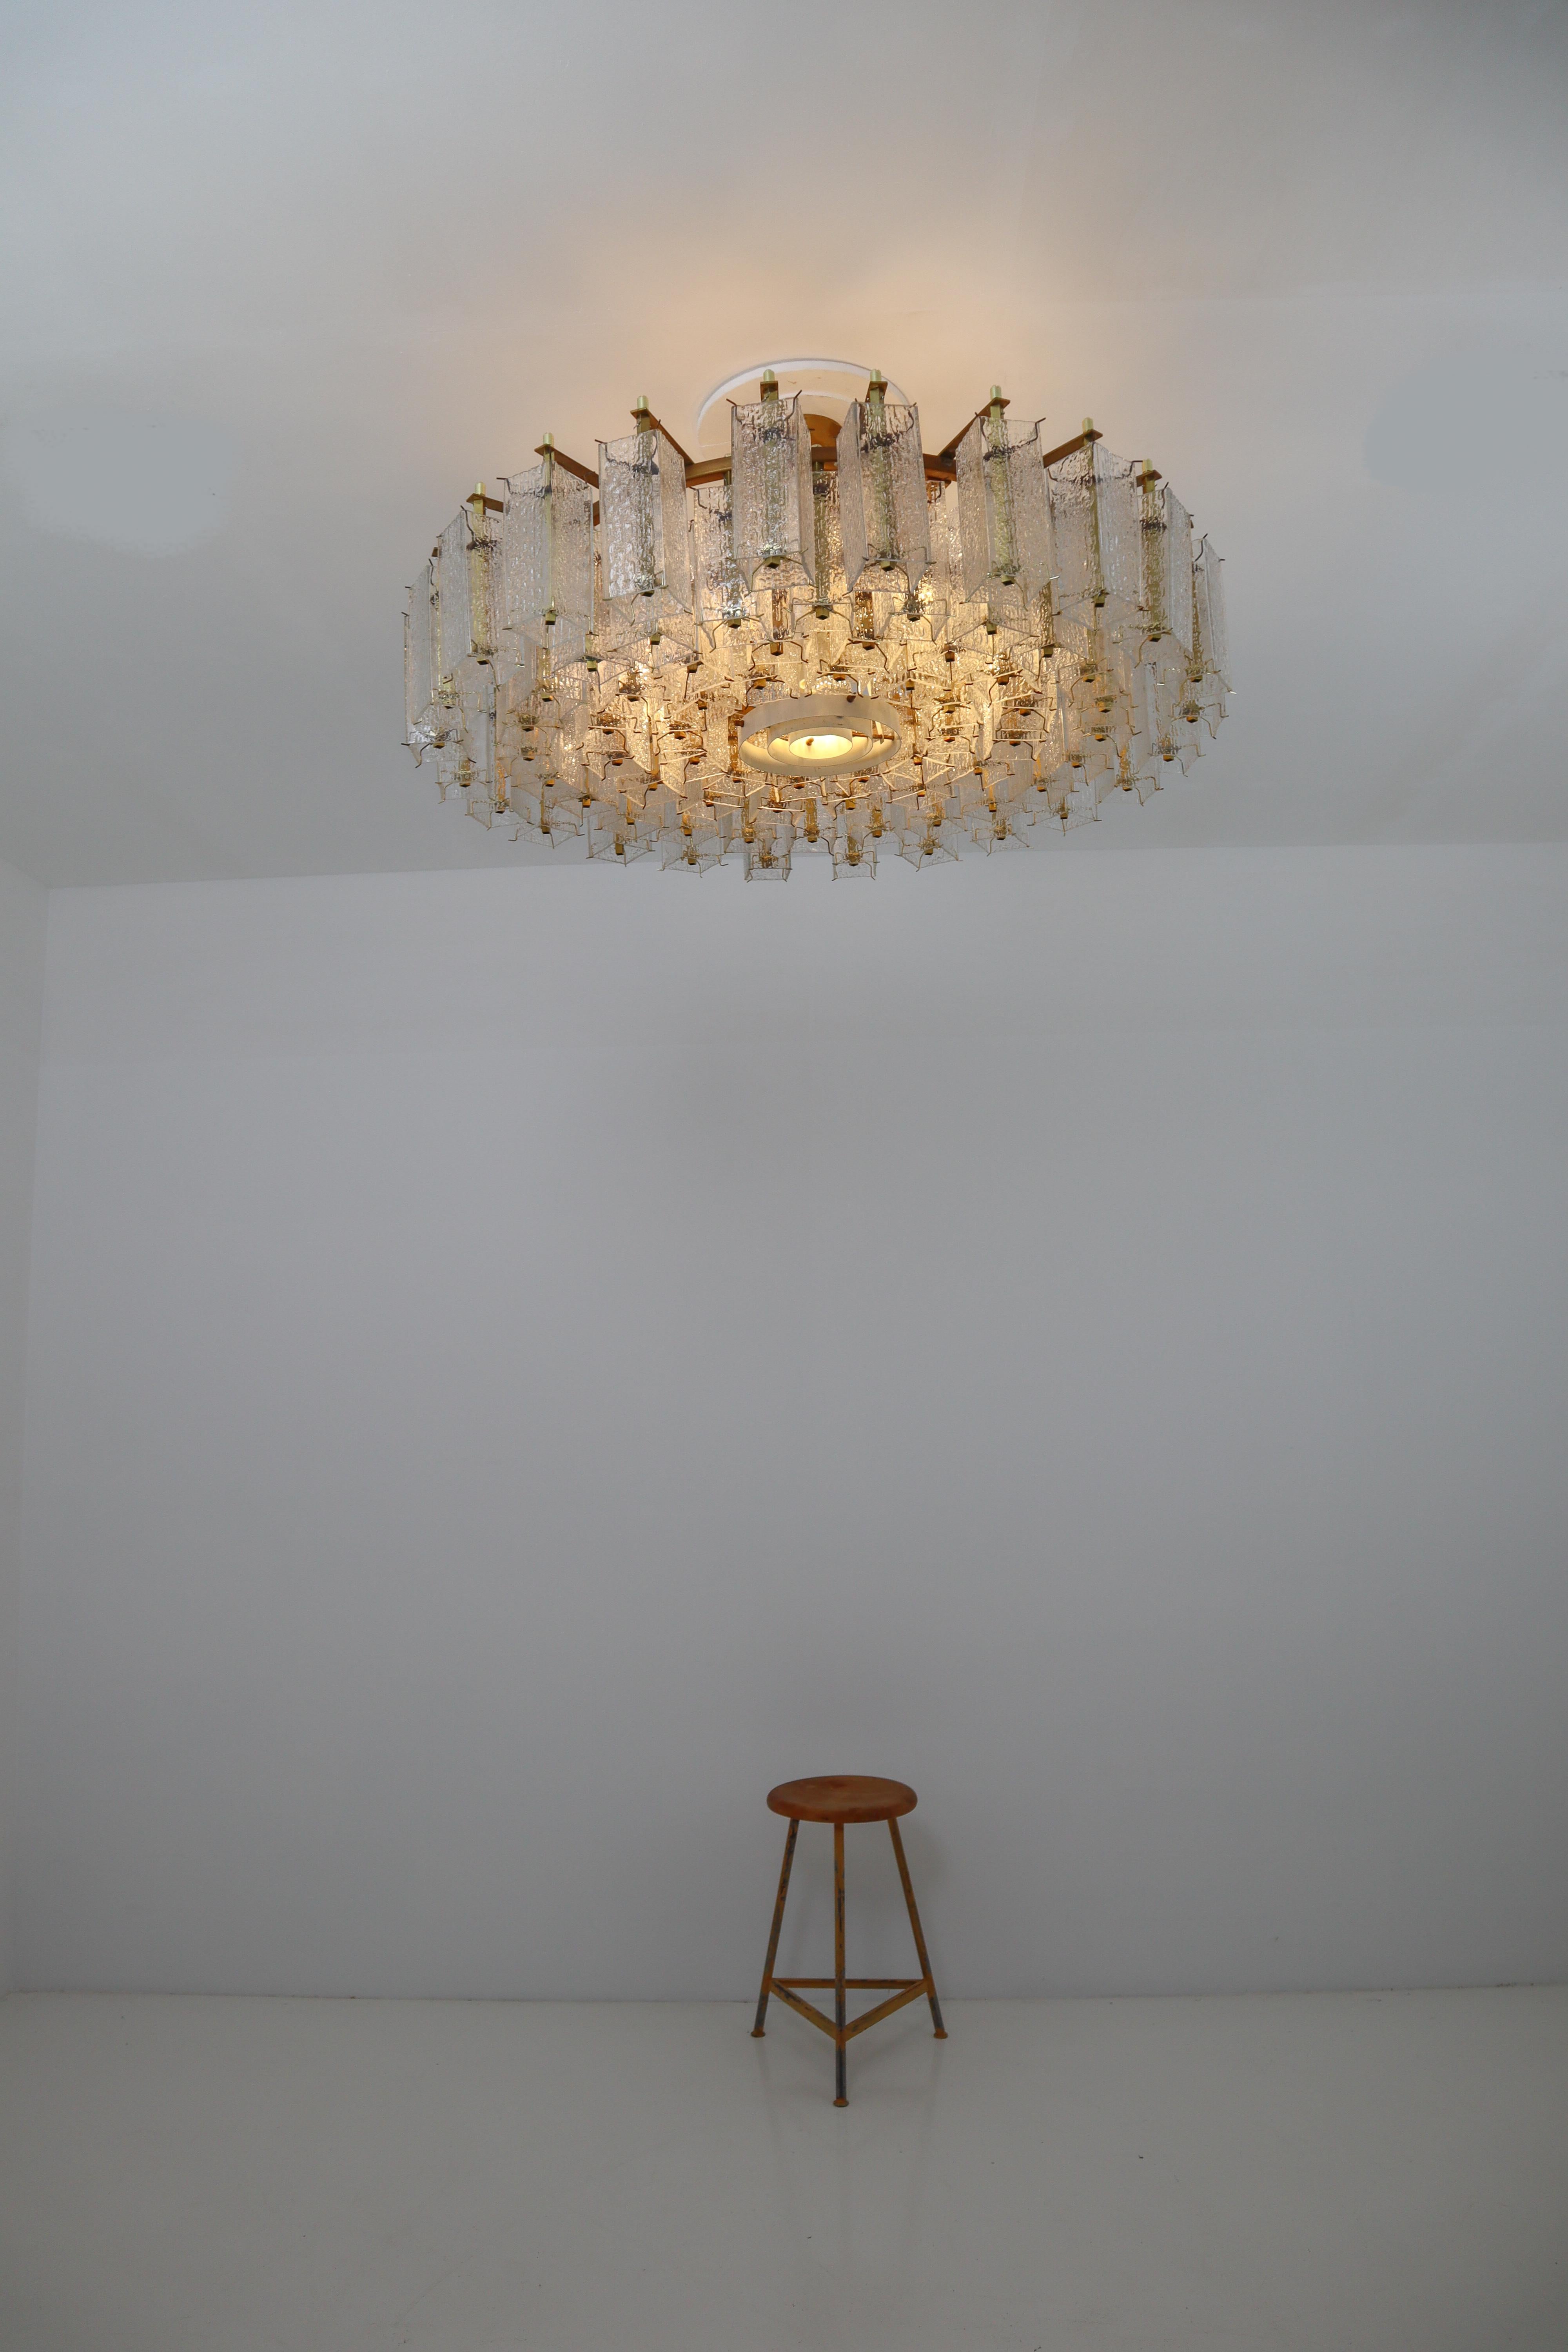 4 Extreme Large Midcentury Chandeliers in Structured Glass and Brass from Europe 1